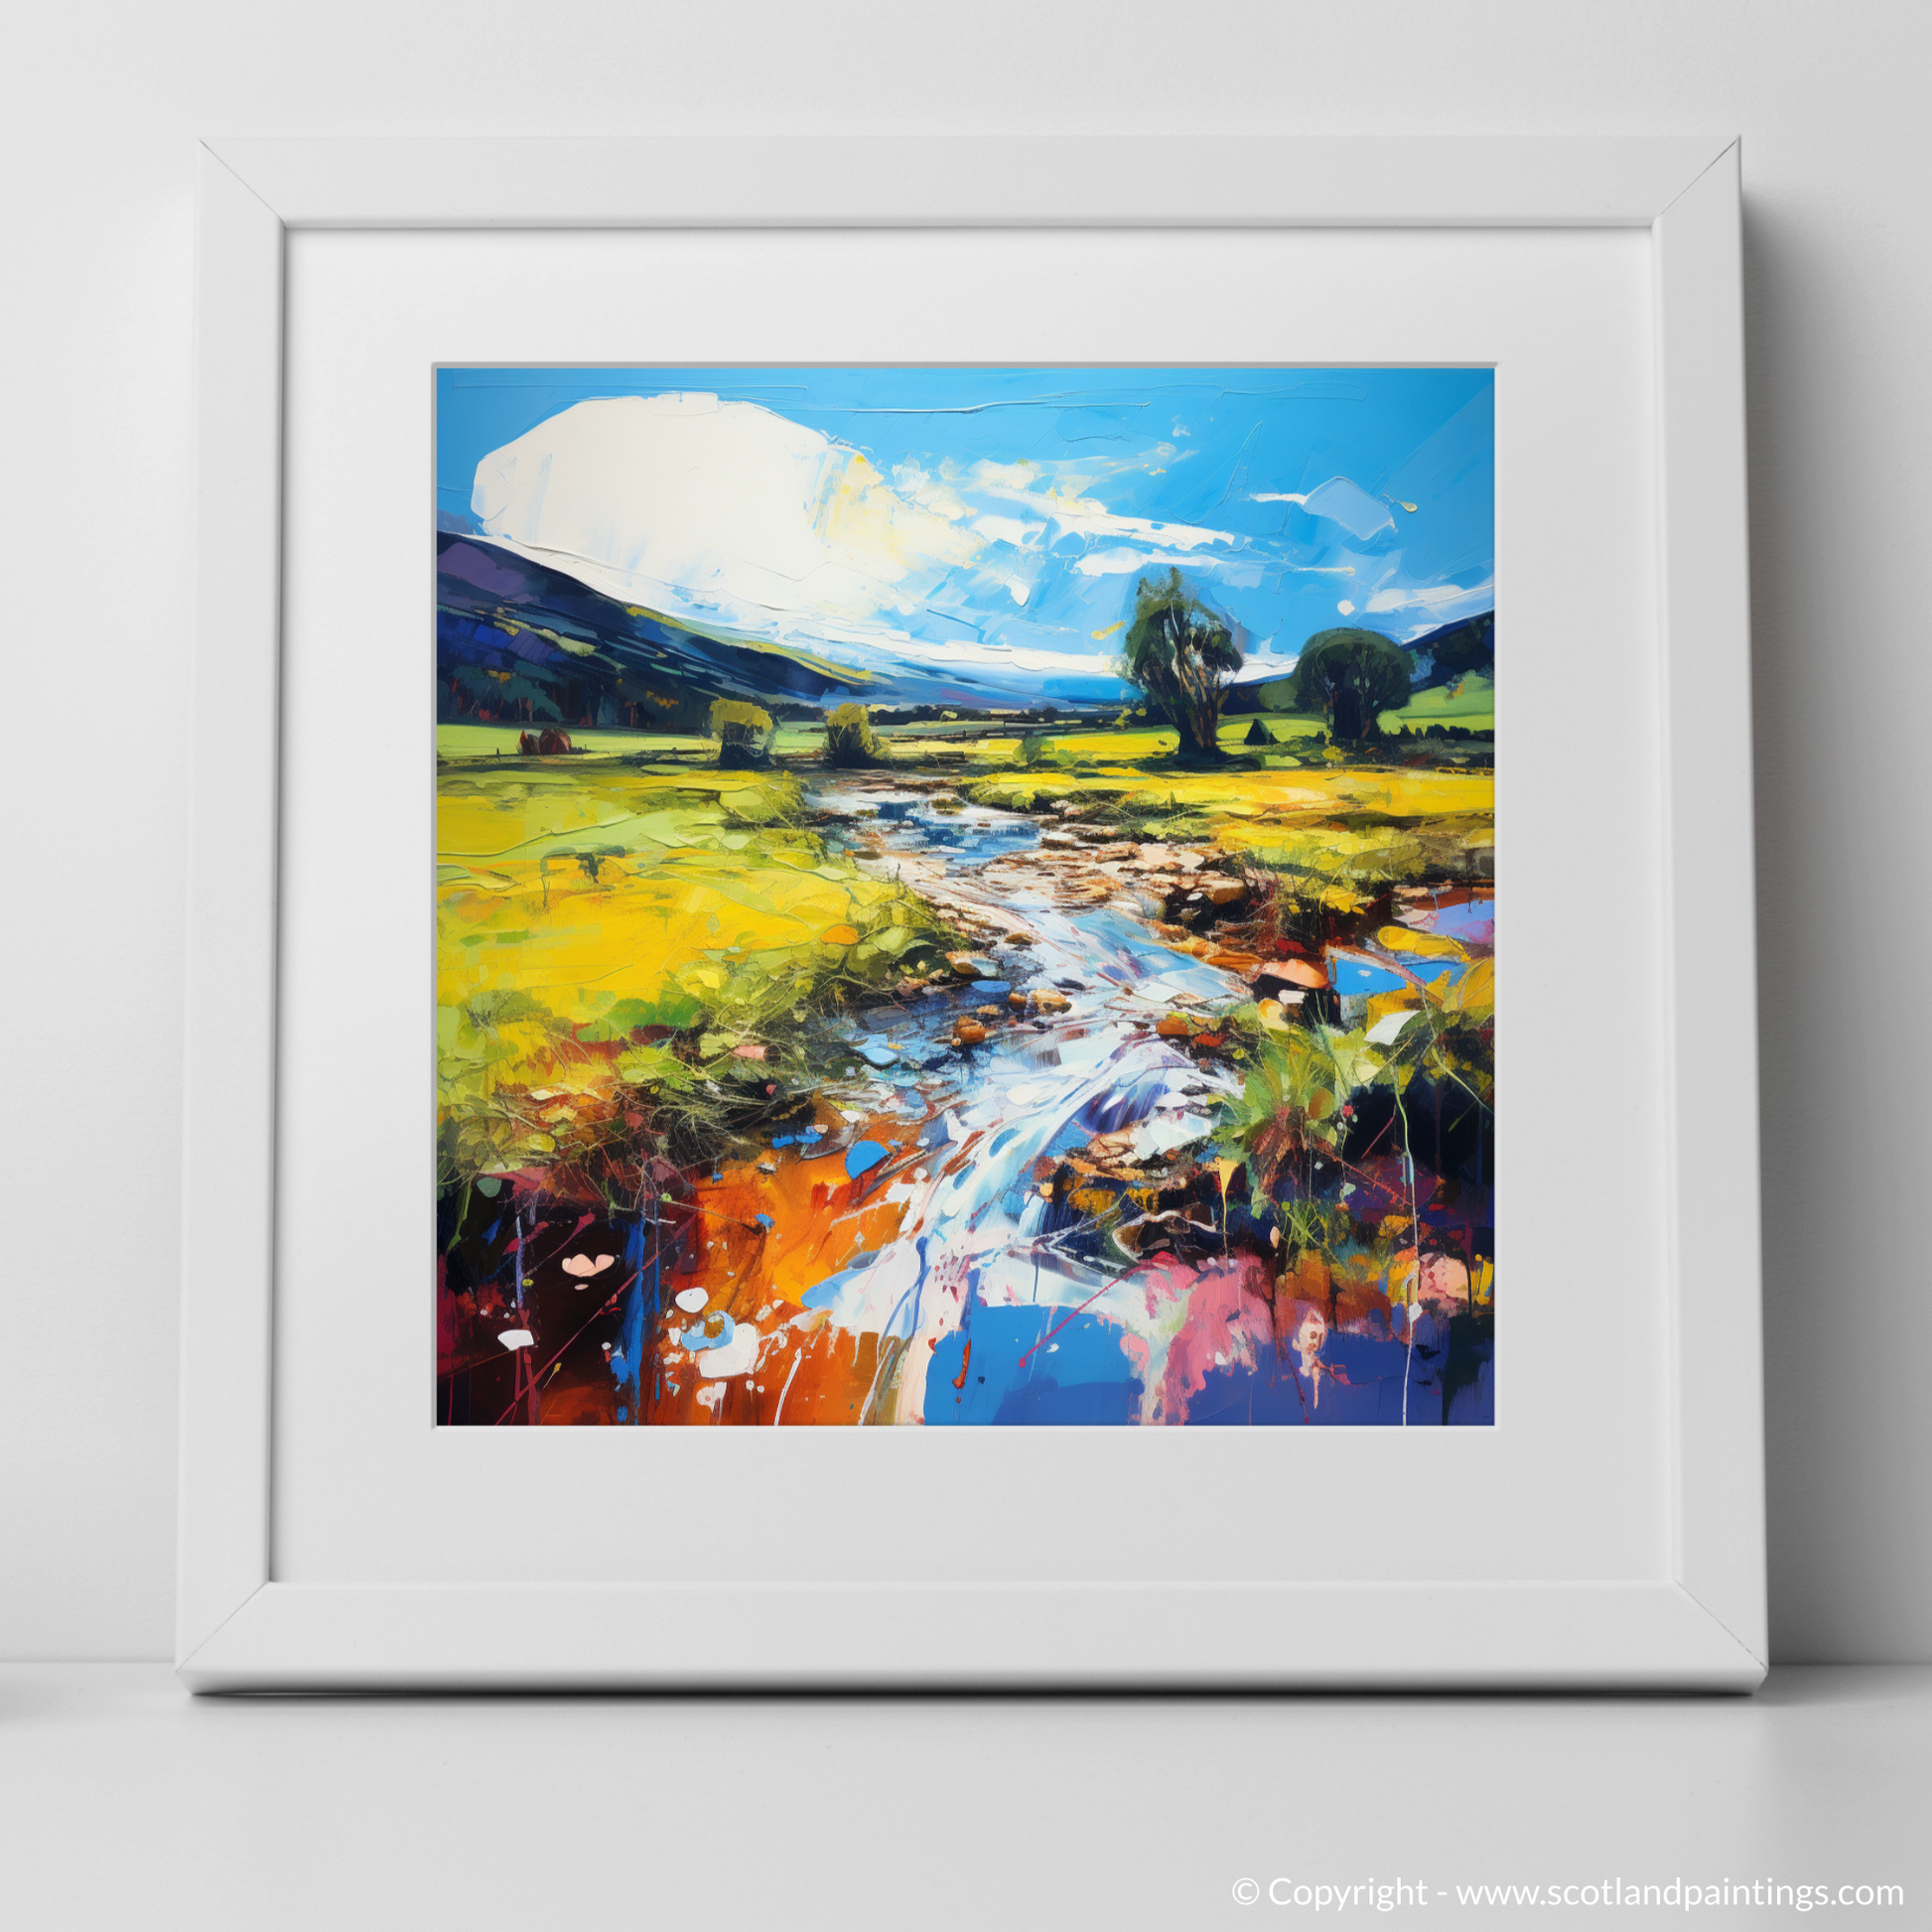 Art Print of Glen Esk, Angus in summer with a white frame